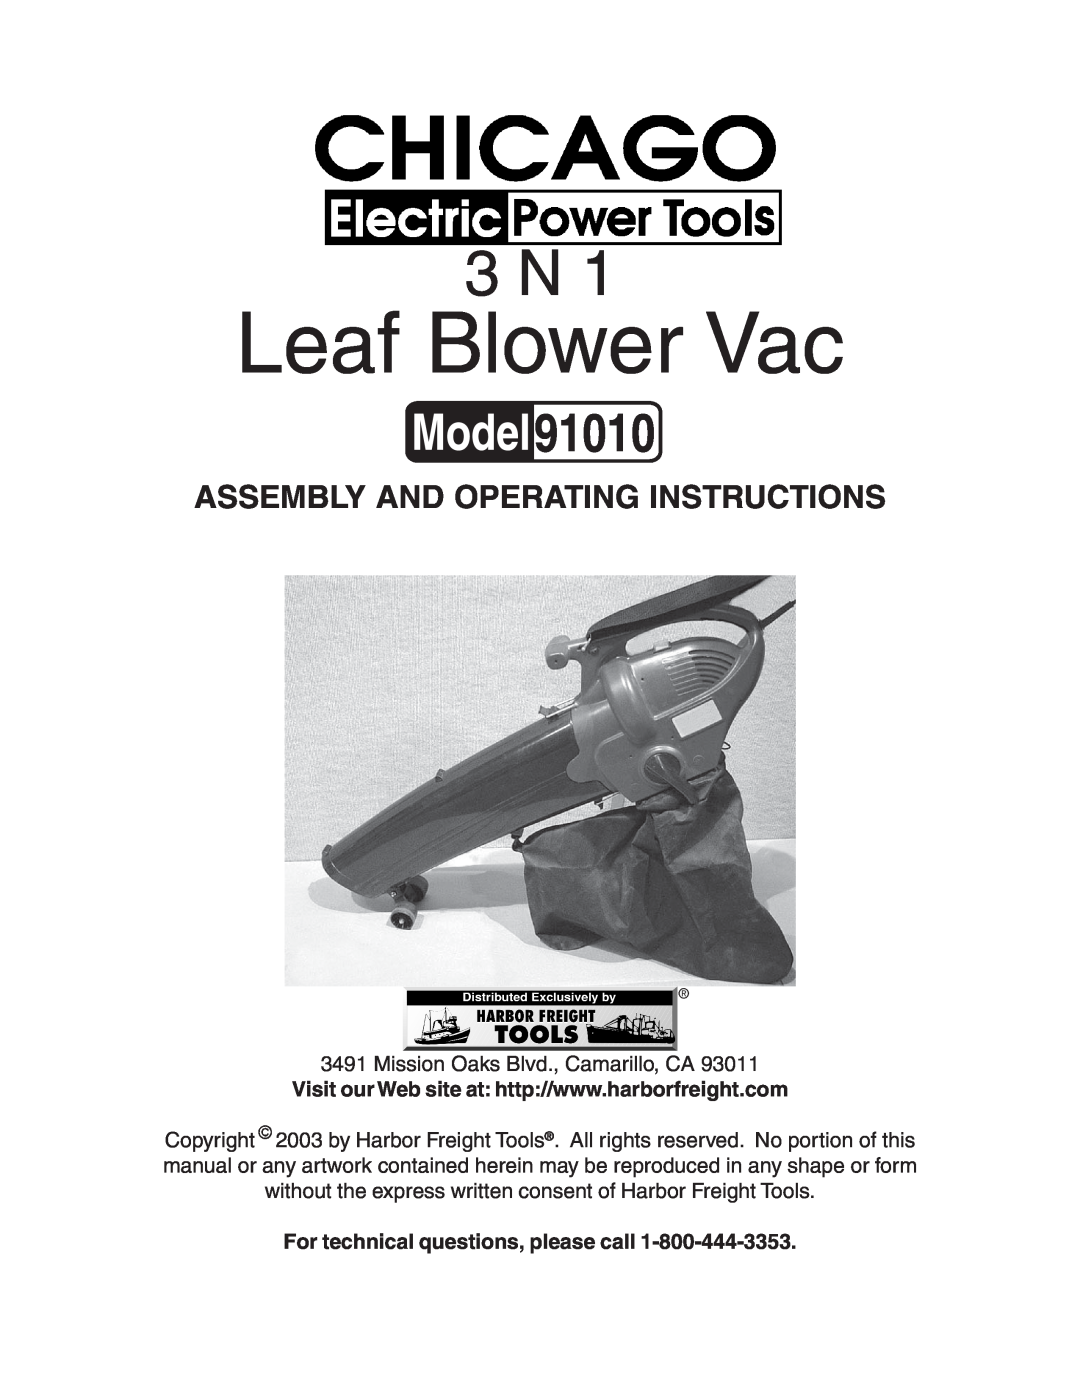 Harbor Freight Tools 91010 operating instructions For technical questions, please call, Leaf Blower Vac 